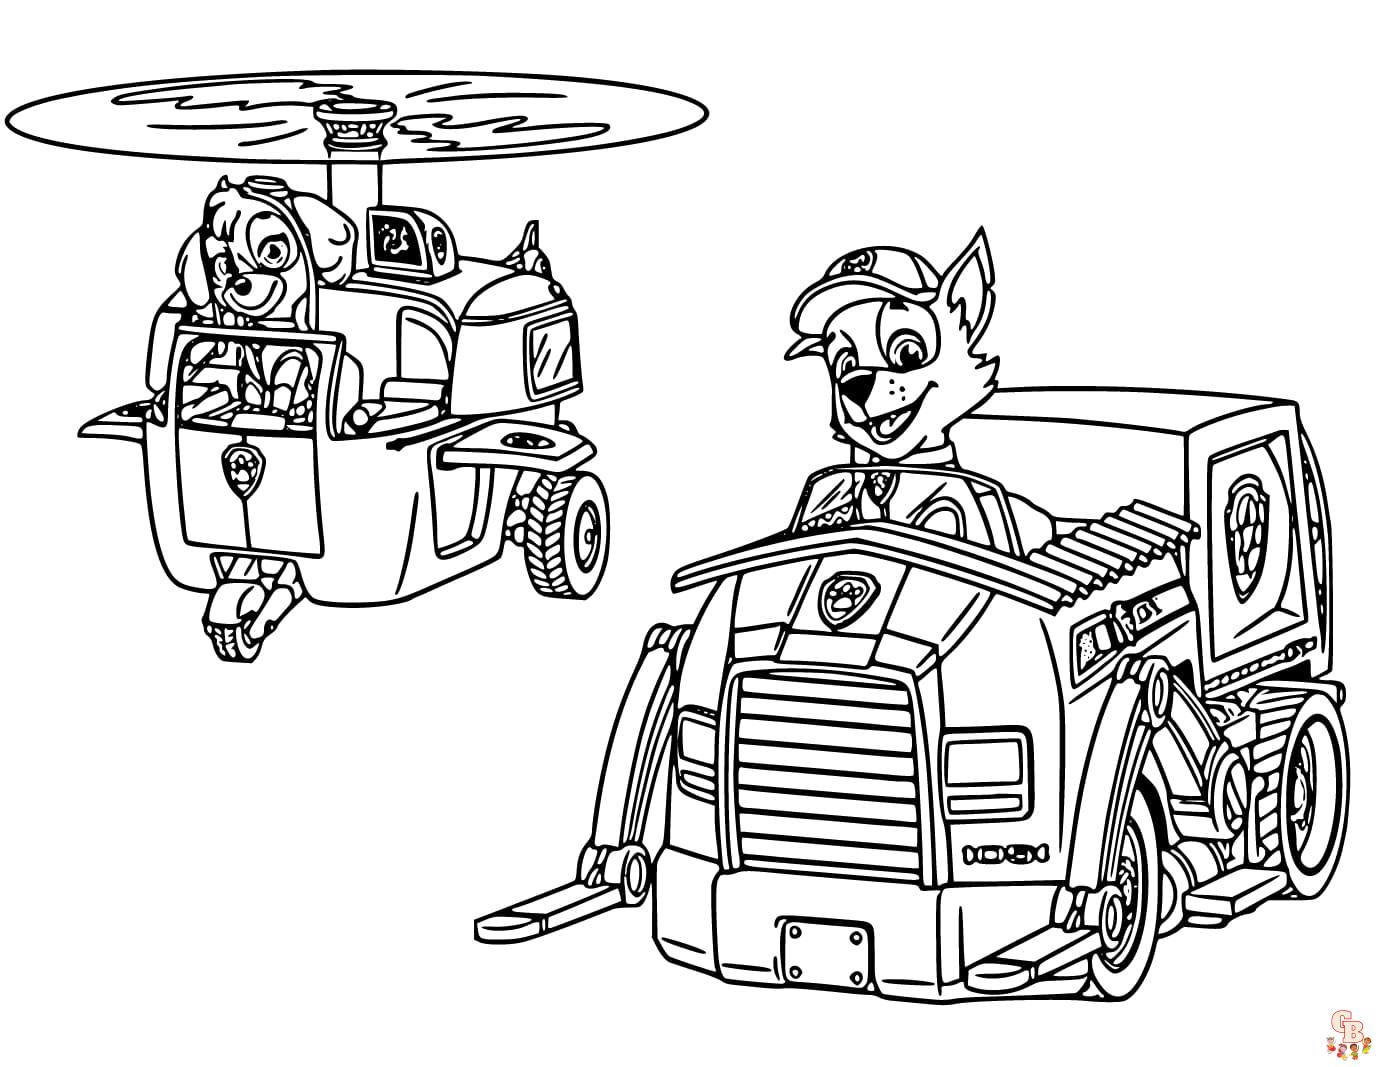 Paw Patrol coloring pages